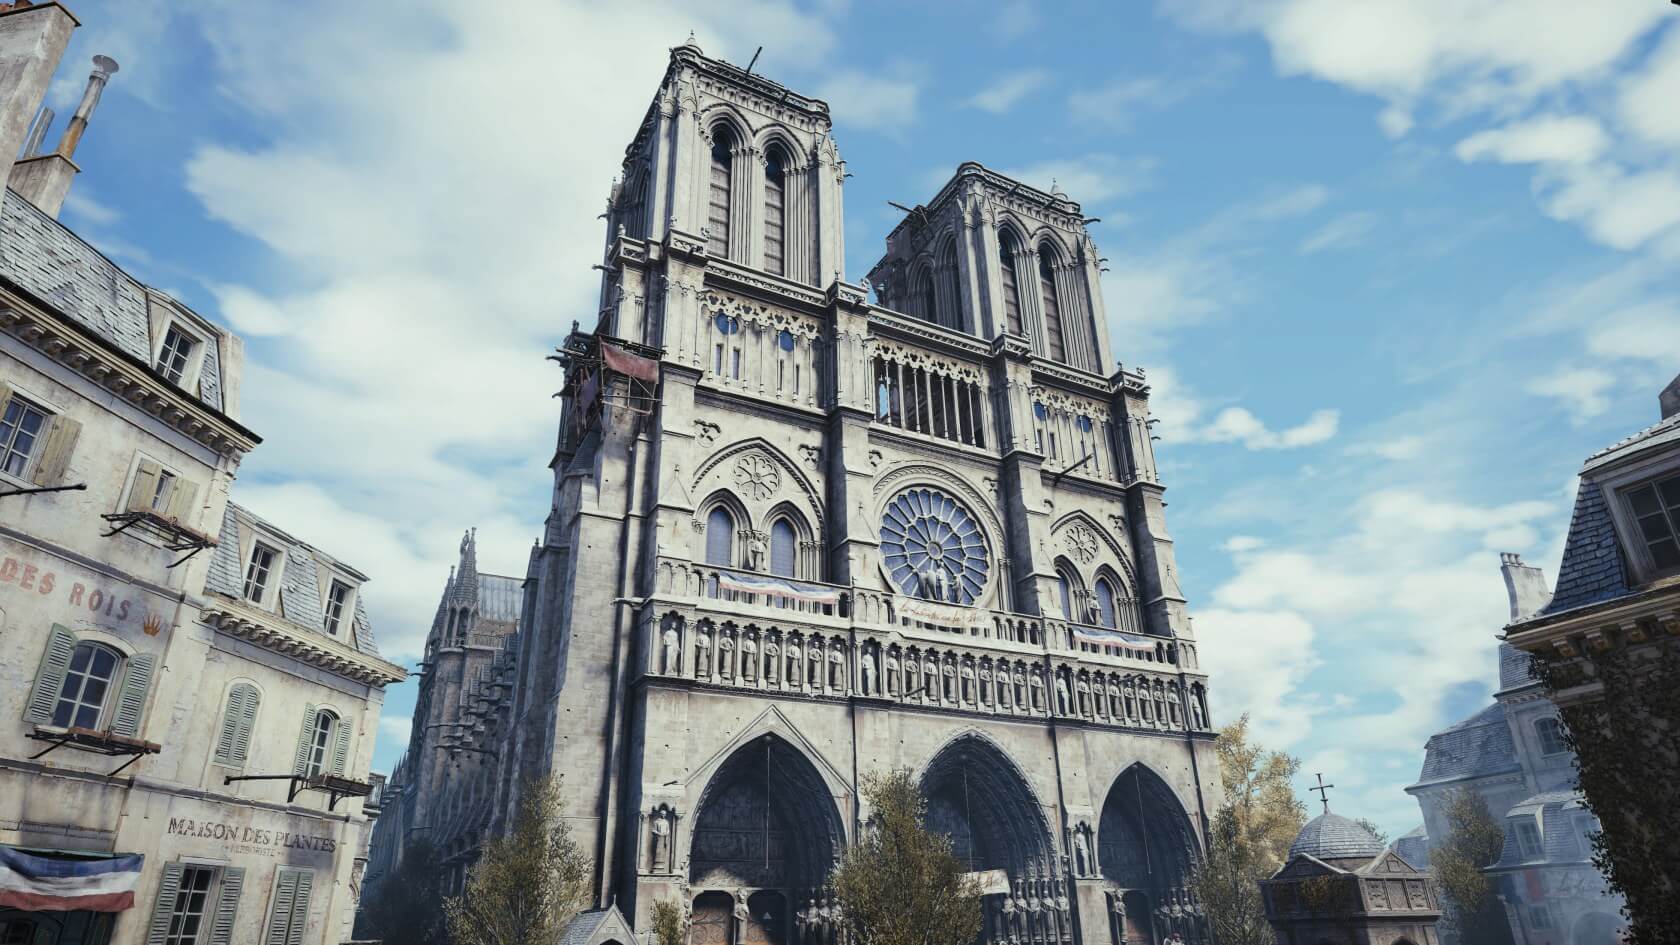 Ubisoft launches Assassin's Creed Unity giveaway and donates €500,000 to aid in Notre Dame's restoration